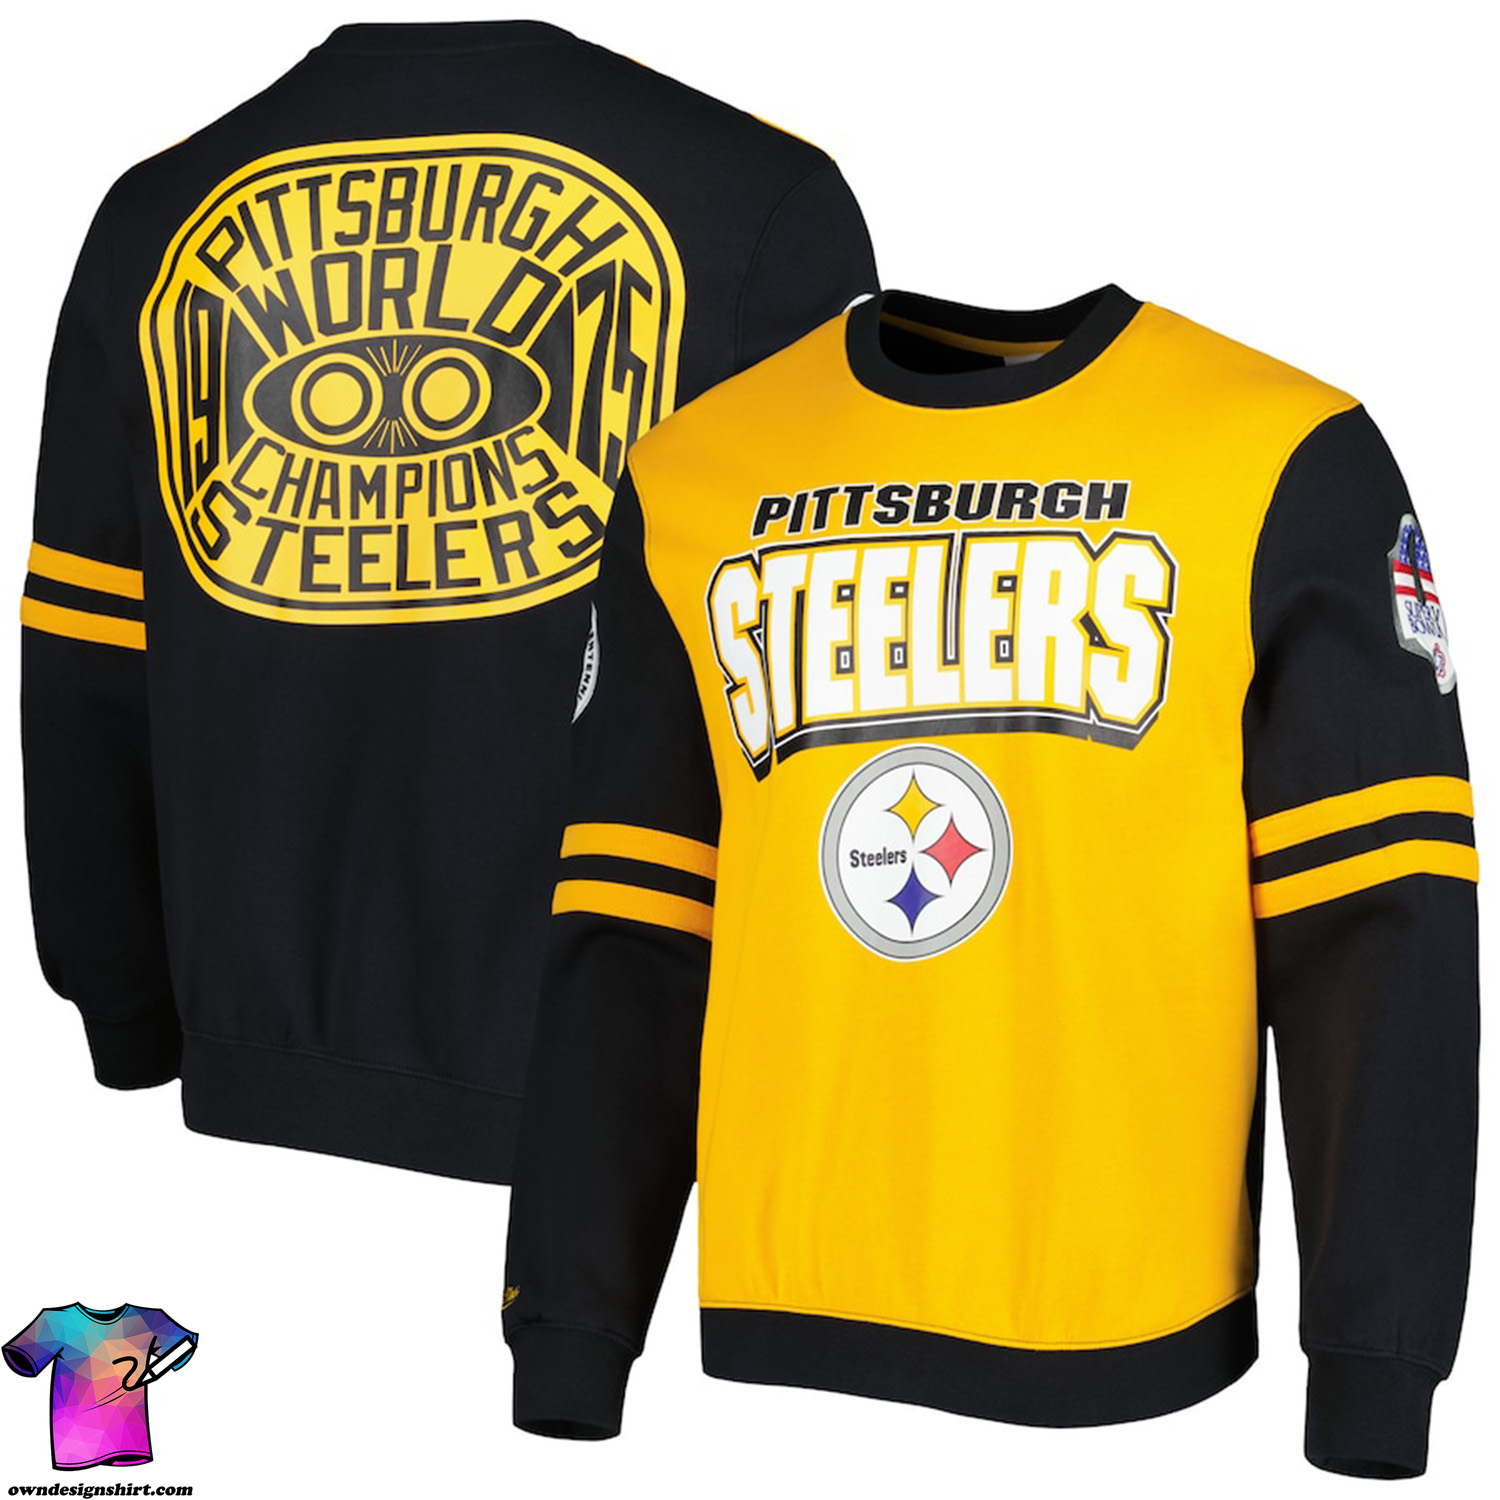 Steel City Showdown Pittsburgh Steelers Gear Up for a Thrilling Season